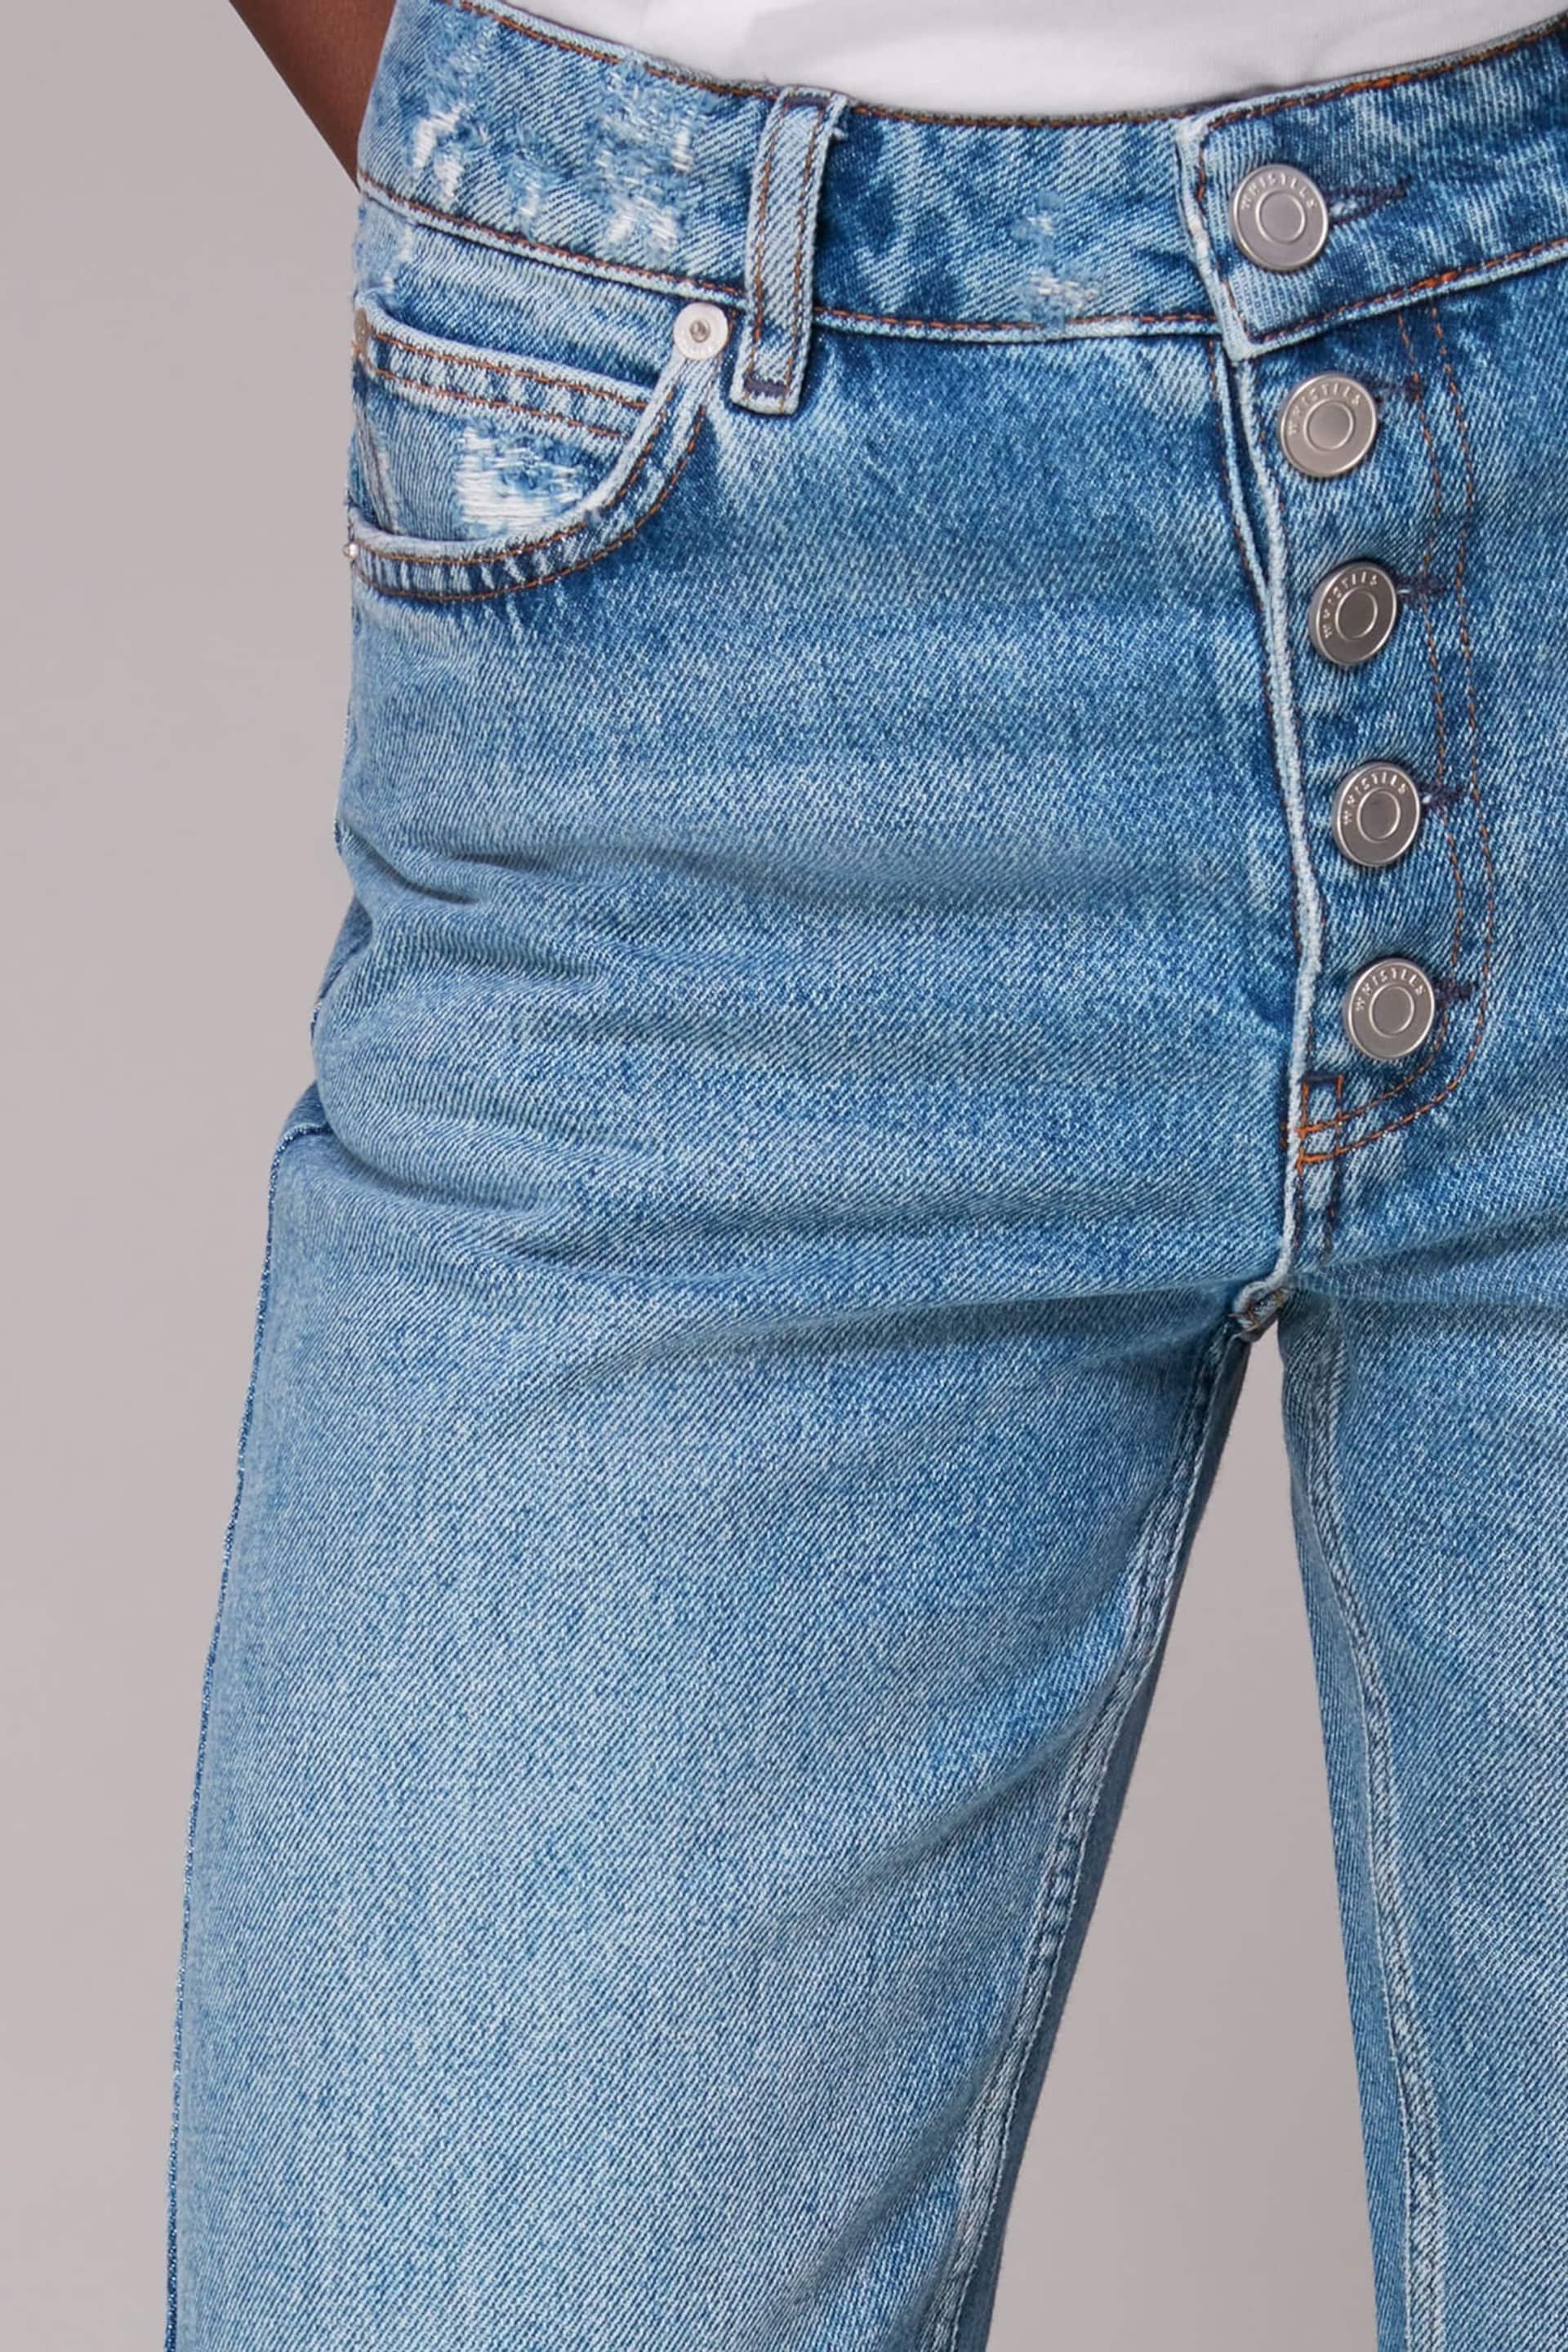 Whistles Authentic Hollie Button Crop Jeans - Image 4 of 5